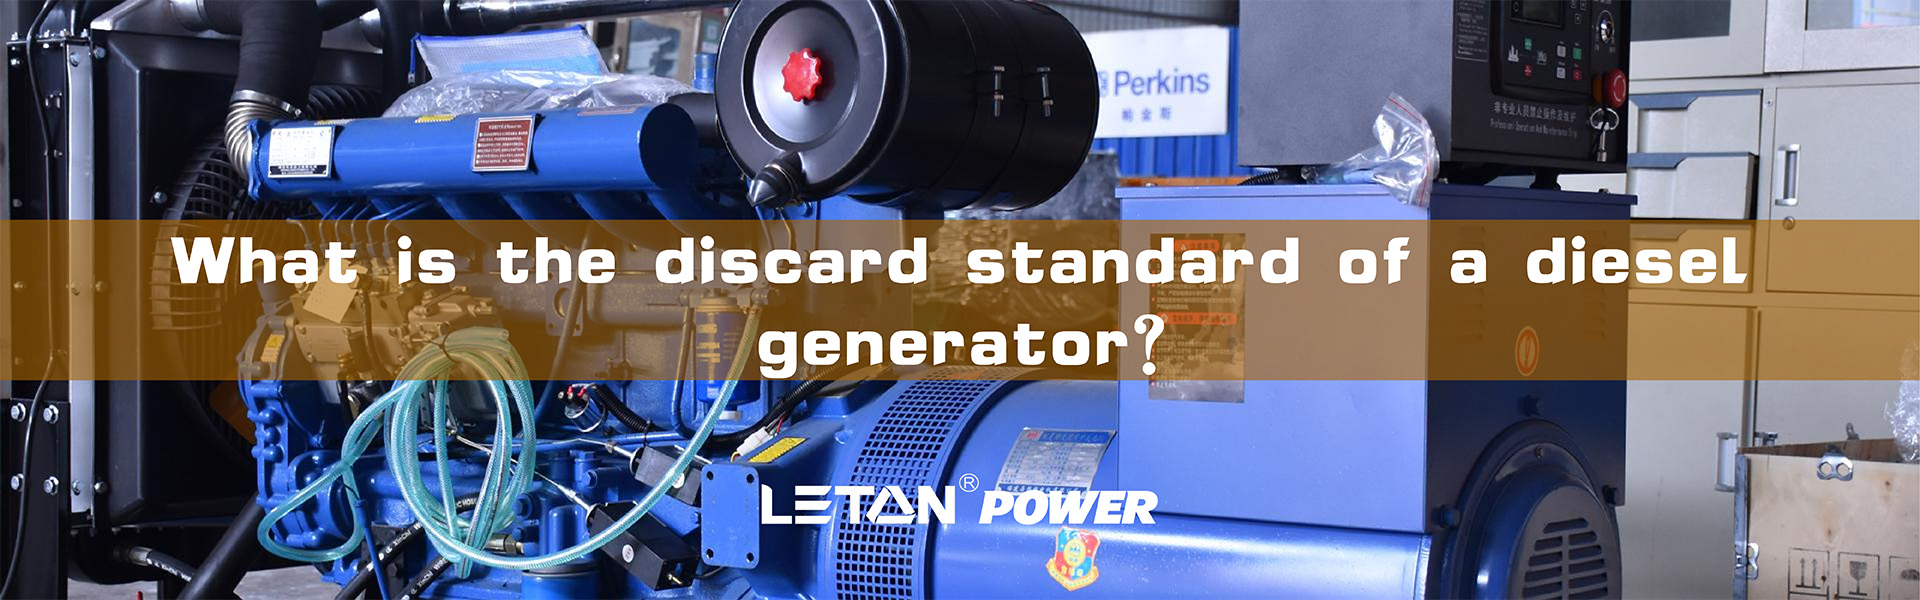 What is the discard standard of a diesel generator?